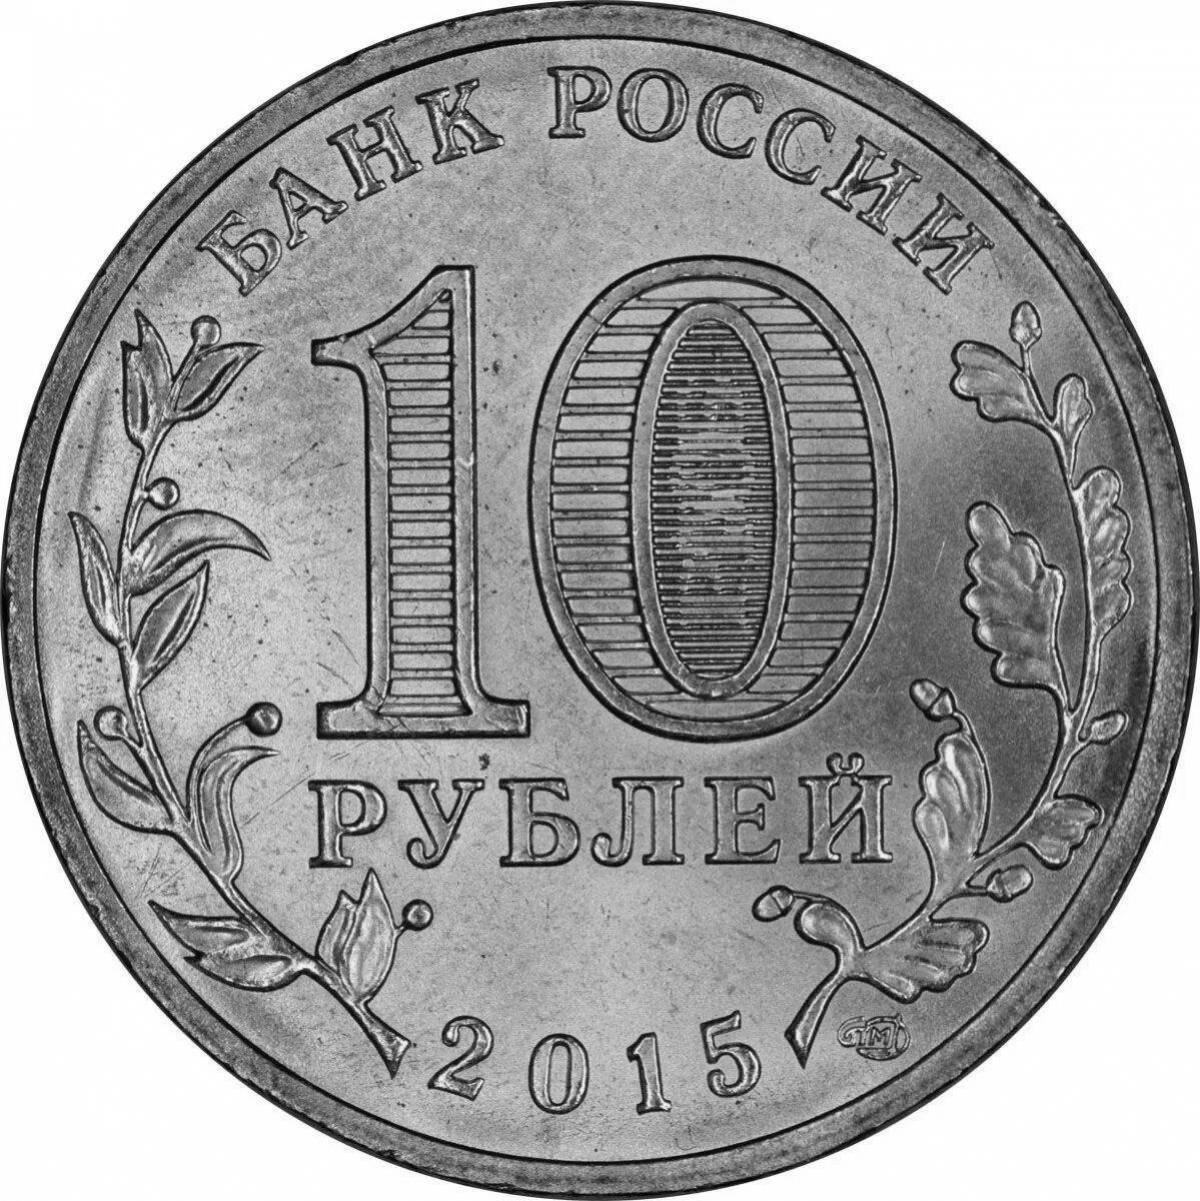 Coloring book shiny coin 10 rubles